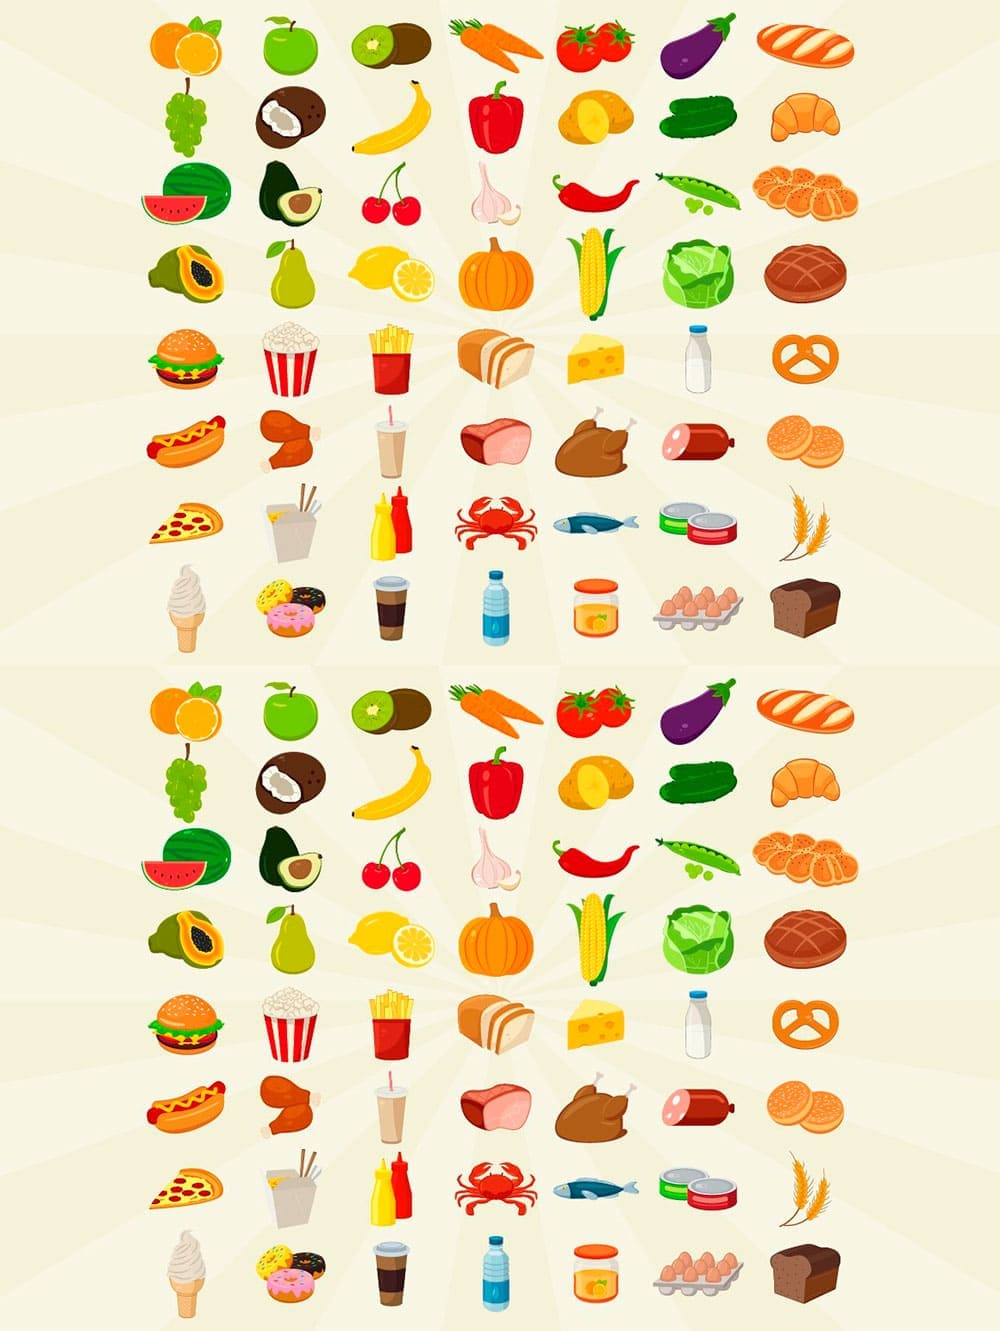 Food icons, picture for pinterest.